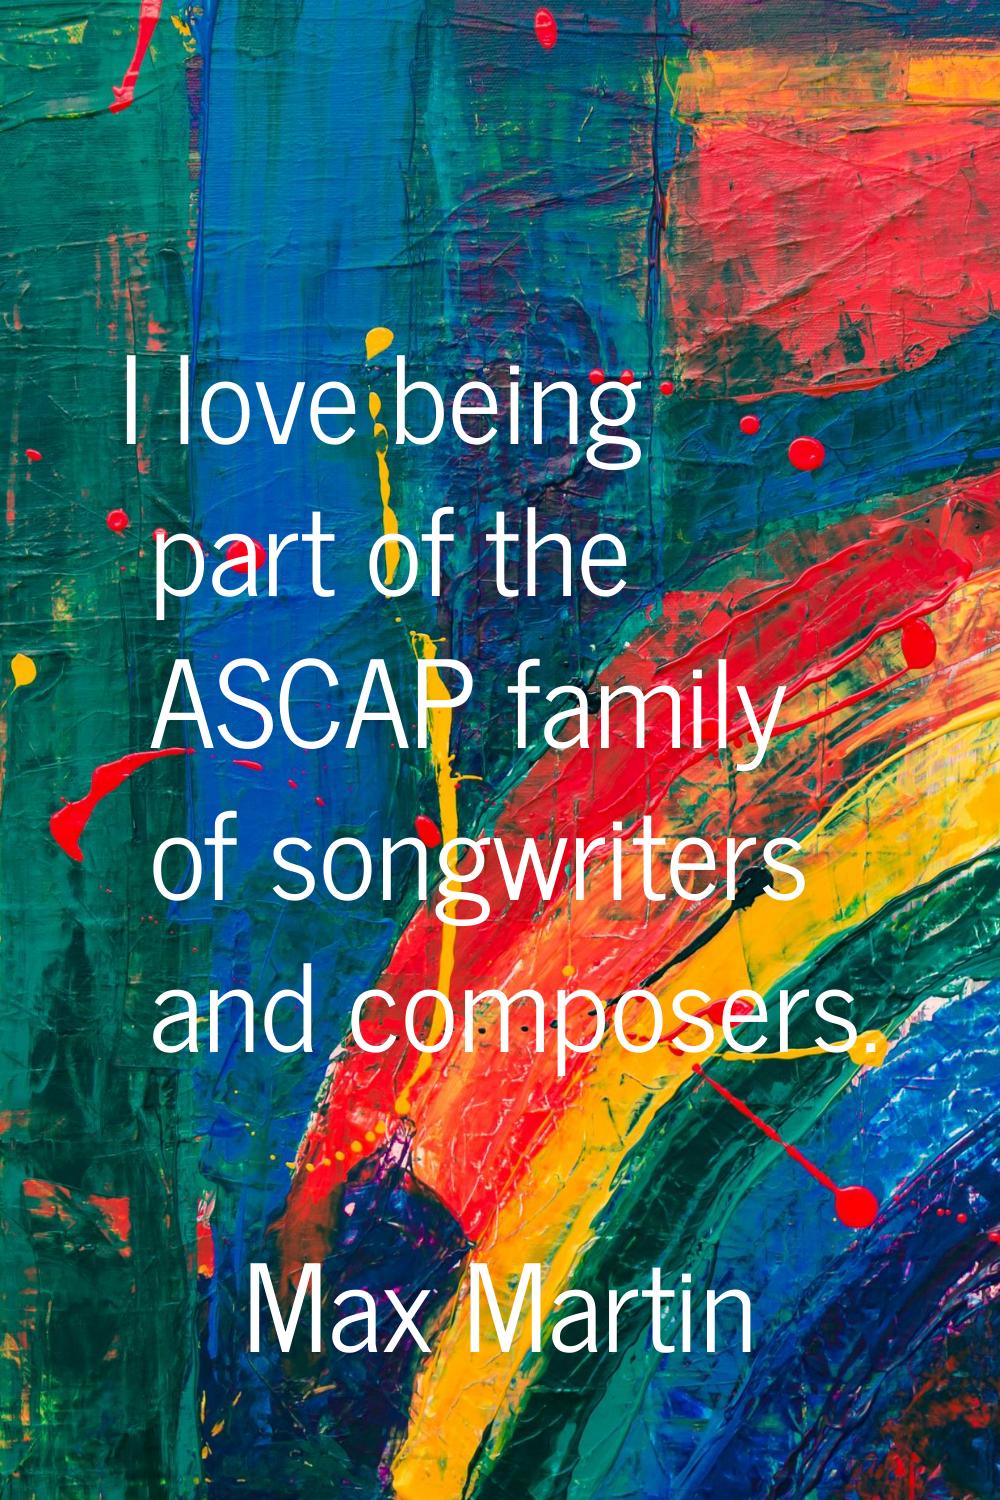 I love being part of the ASCAP family of songwriters and composers.